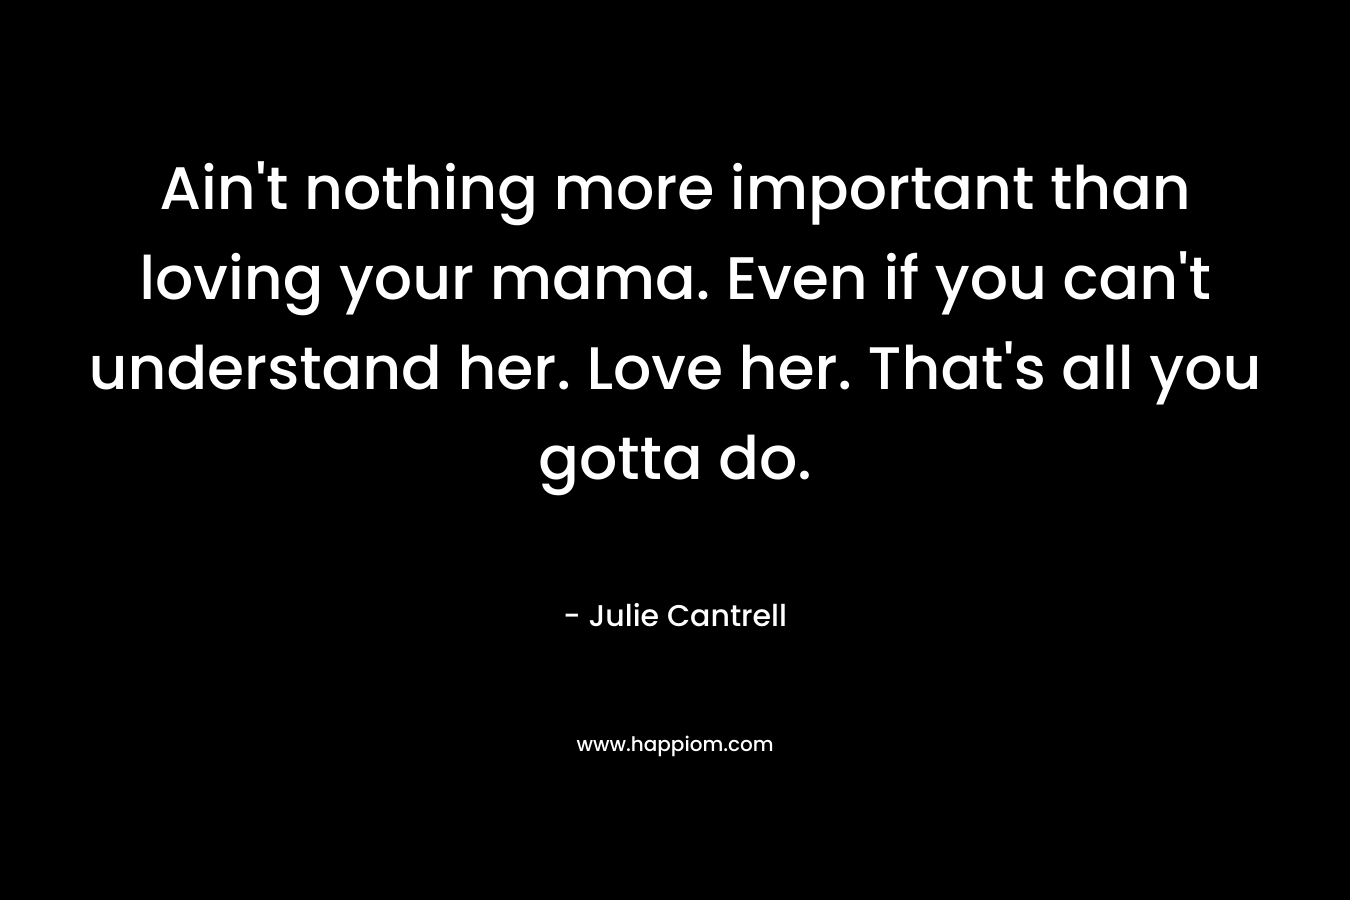 Ain’t nothing more important than loving your mama. Even if you can’t understand her. Love her. That’s all you gotta do. – Julie Cantrell